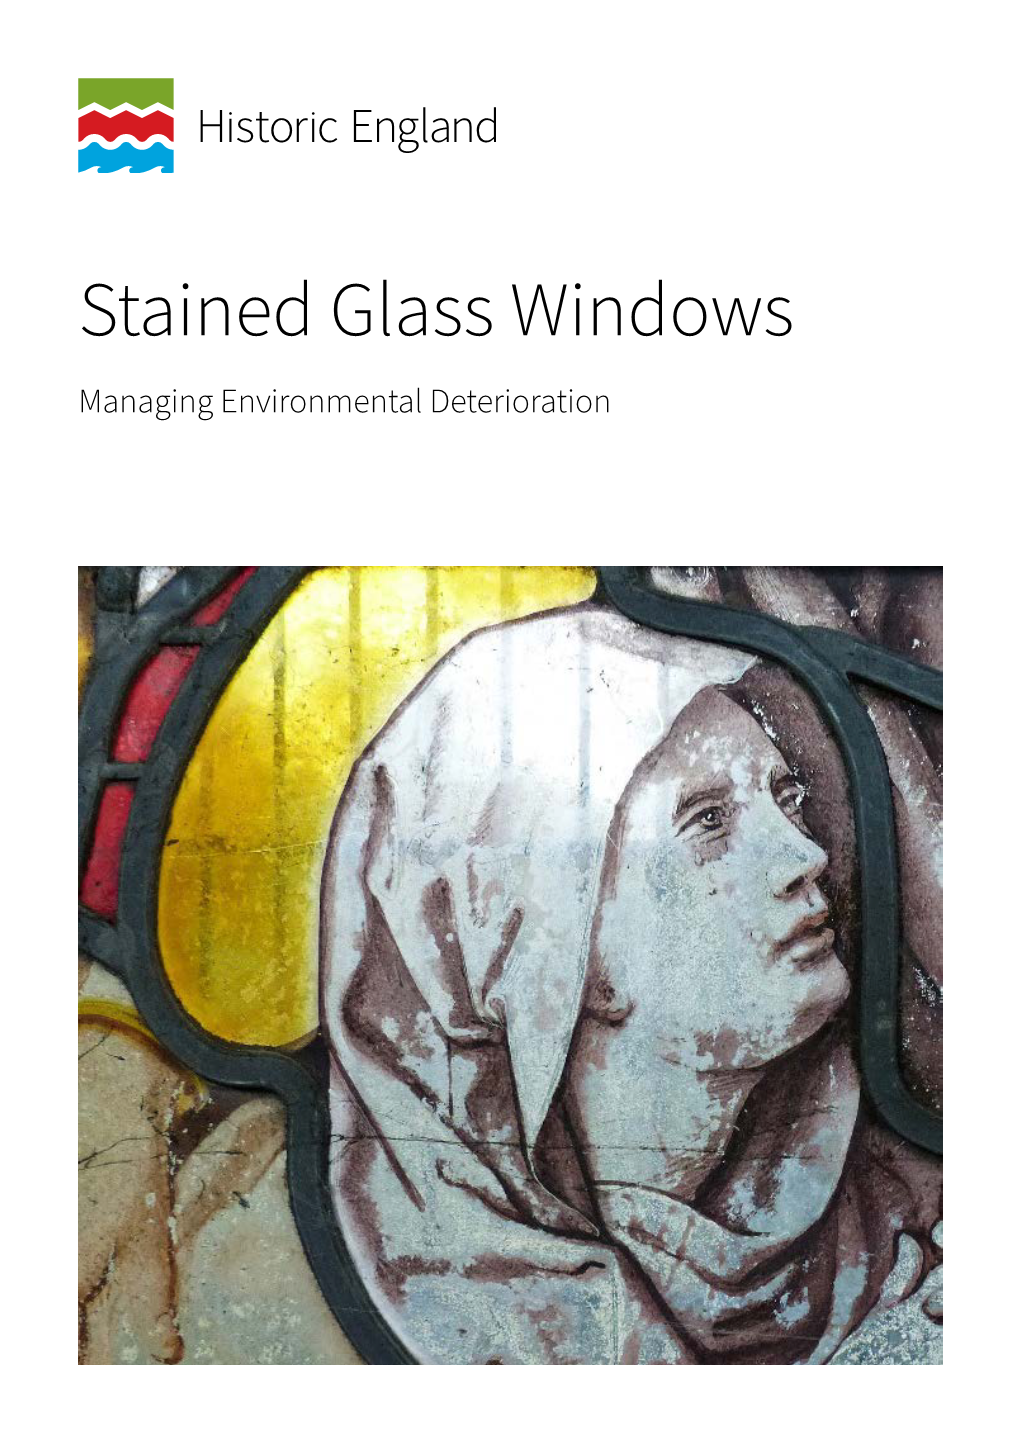 Stained Glass Windows Managing Environmental Deterioration Summary